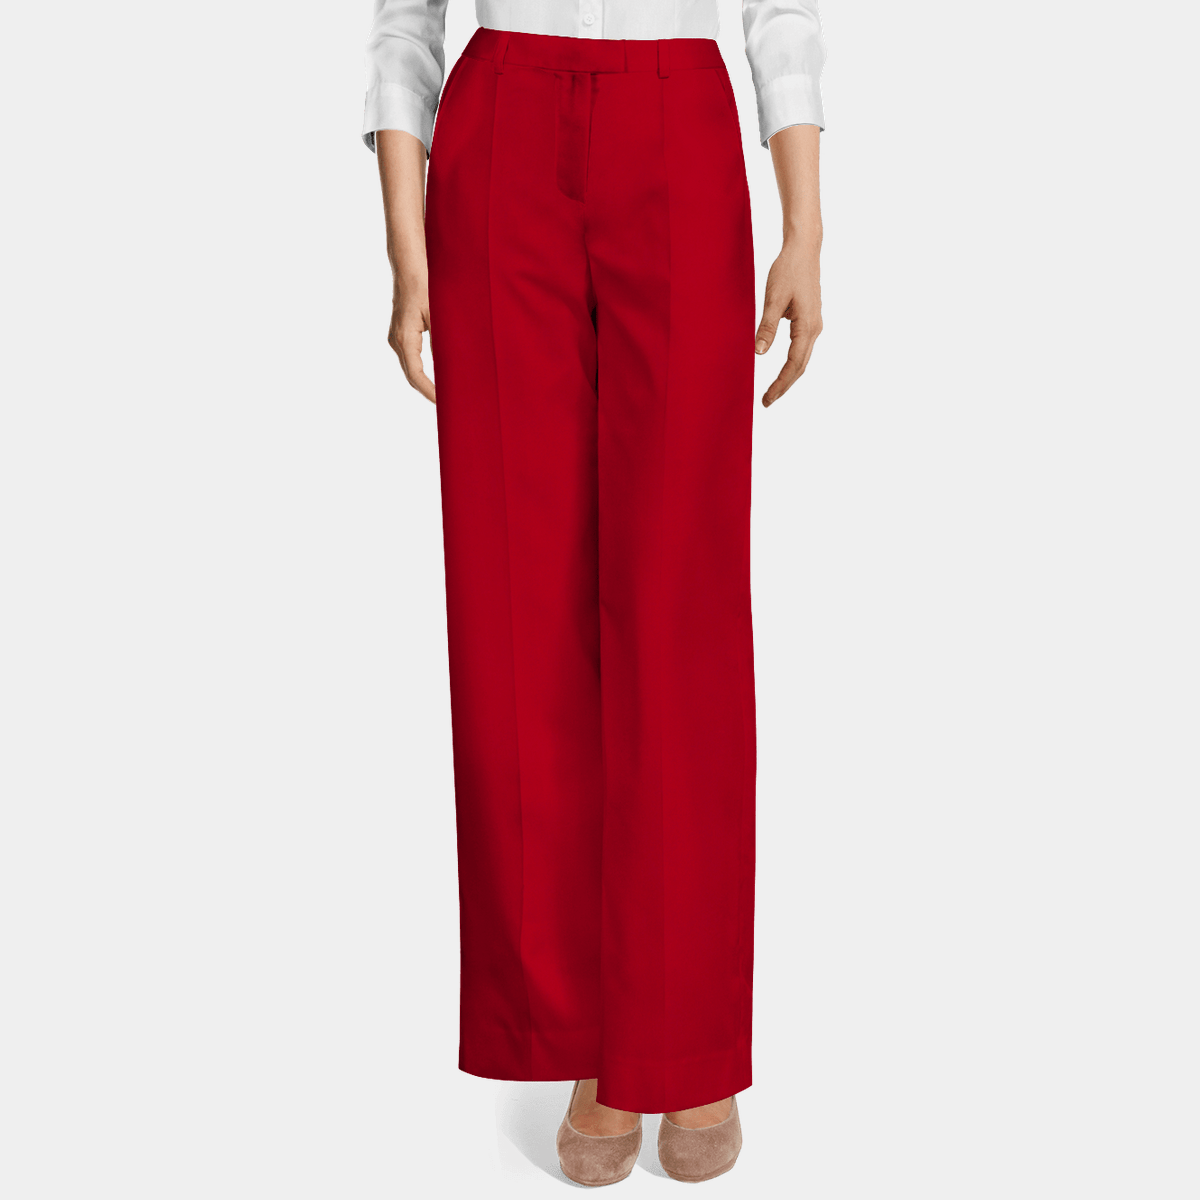 Intense red high waisted flat-front Wide leg Pants